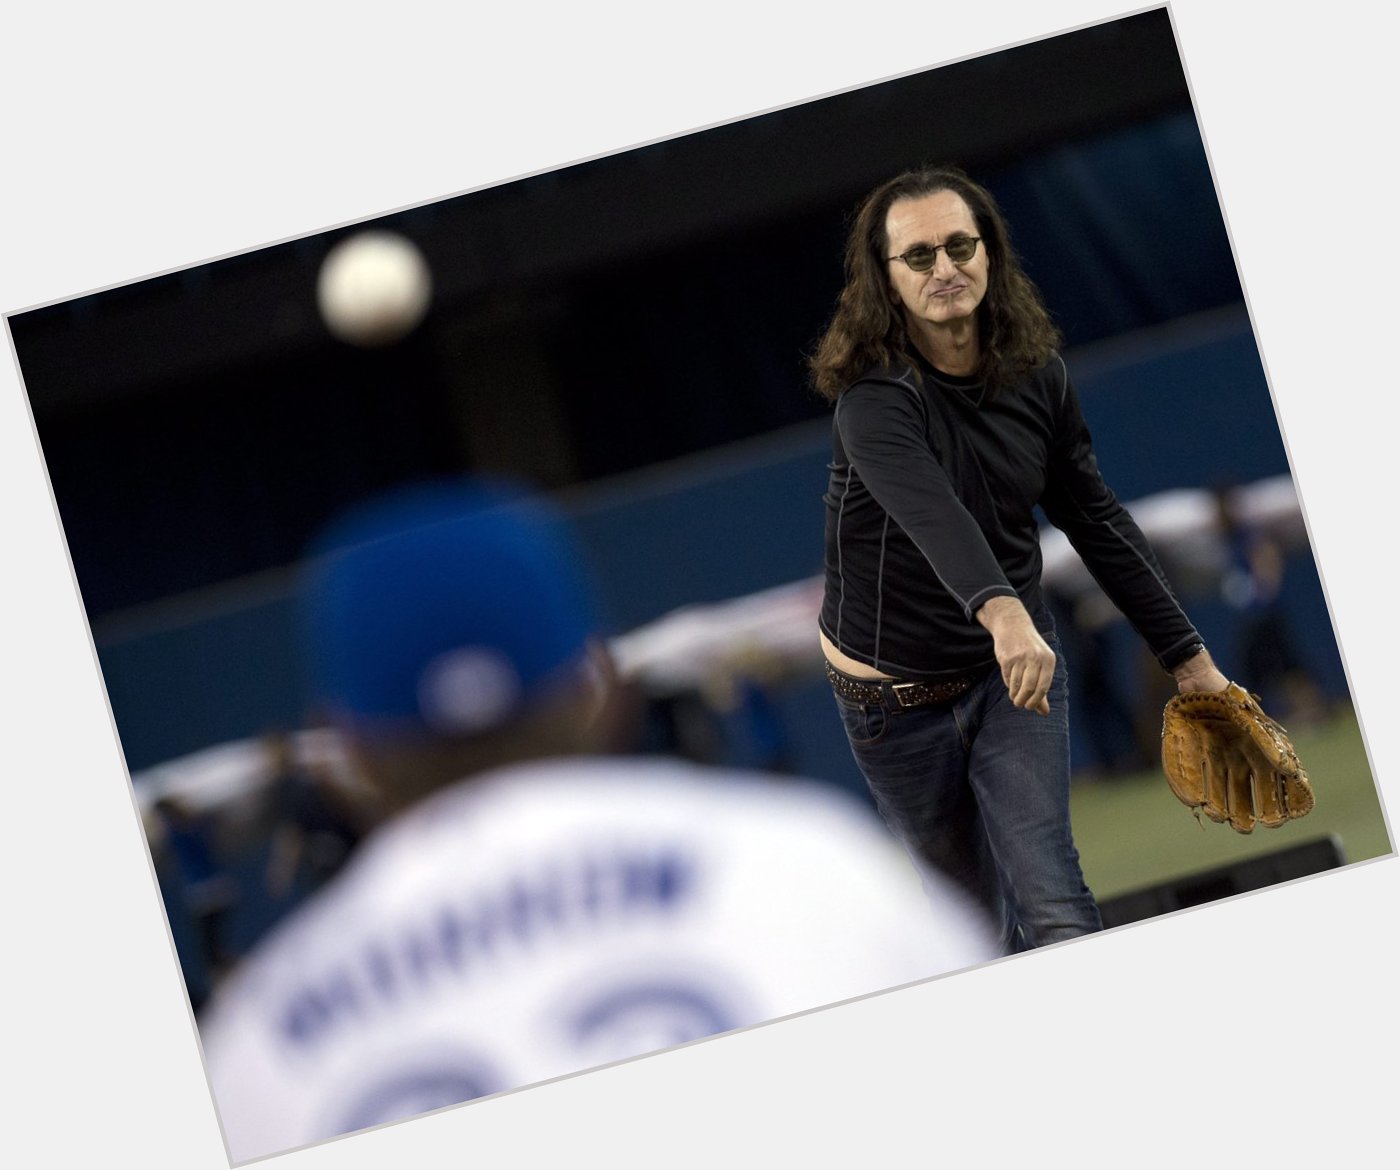 Some are born to ROCK the world  Happy birthday to the legend, Geddy Lee! 